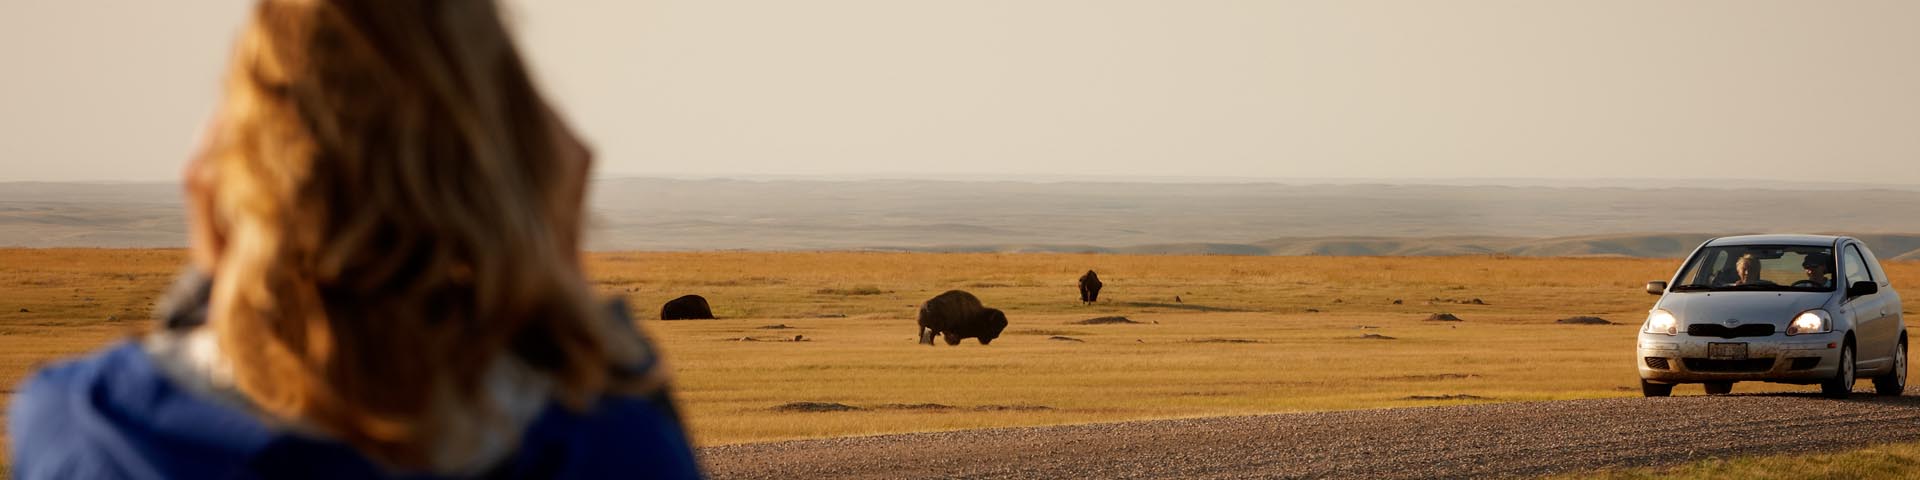 Visitors watch the buffalo on the plains. 